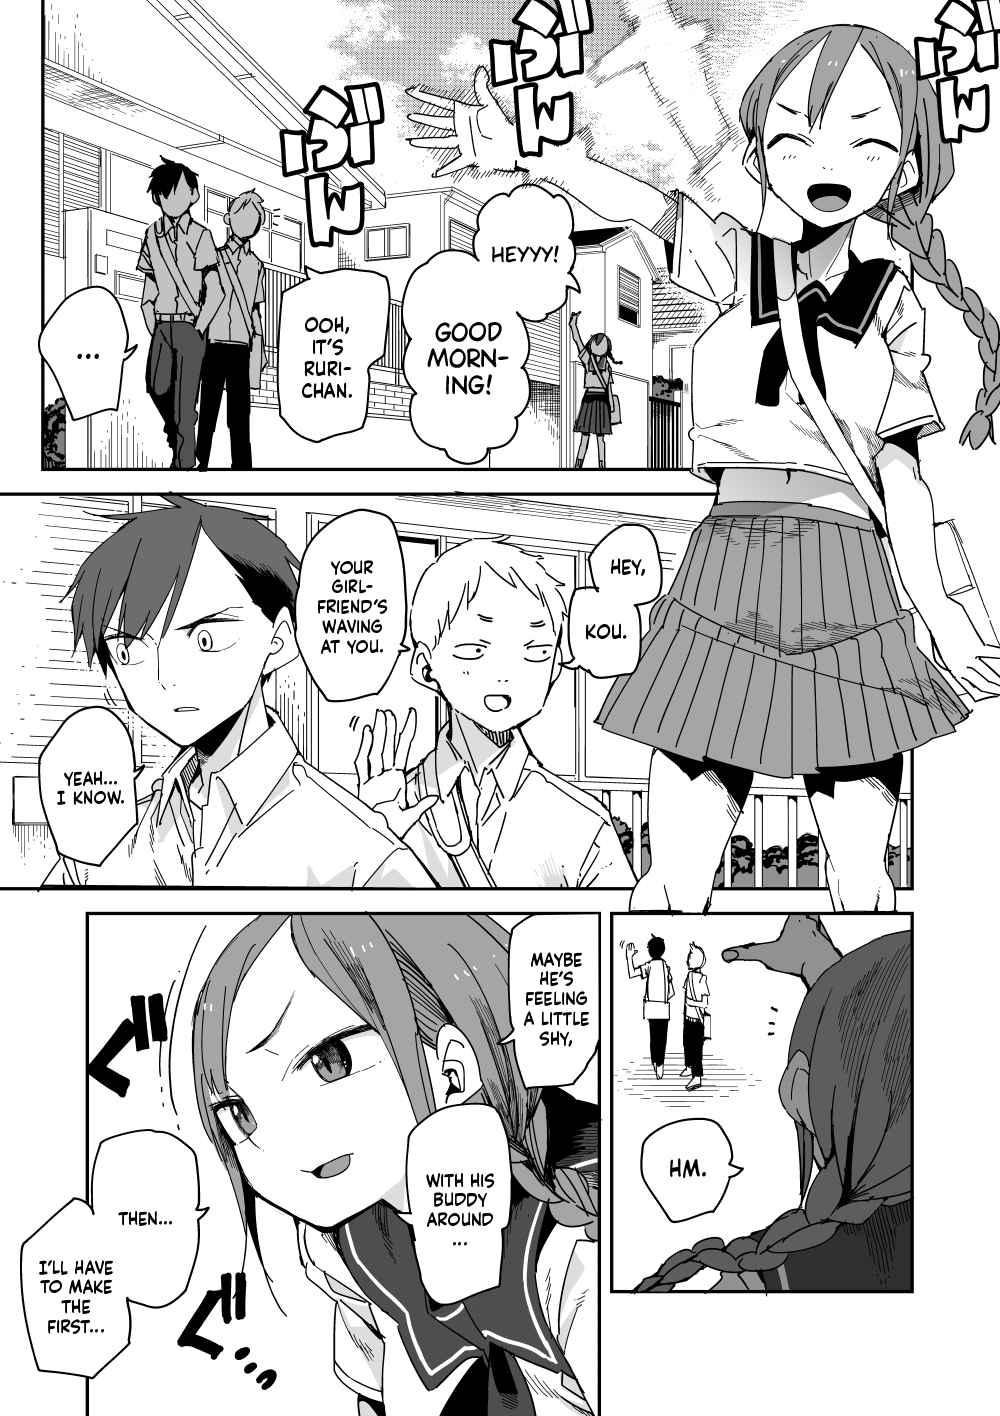 Morning Routine of Couples in Action Manga Oneshot